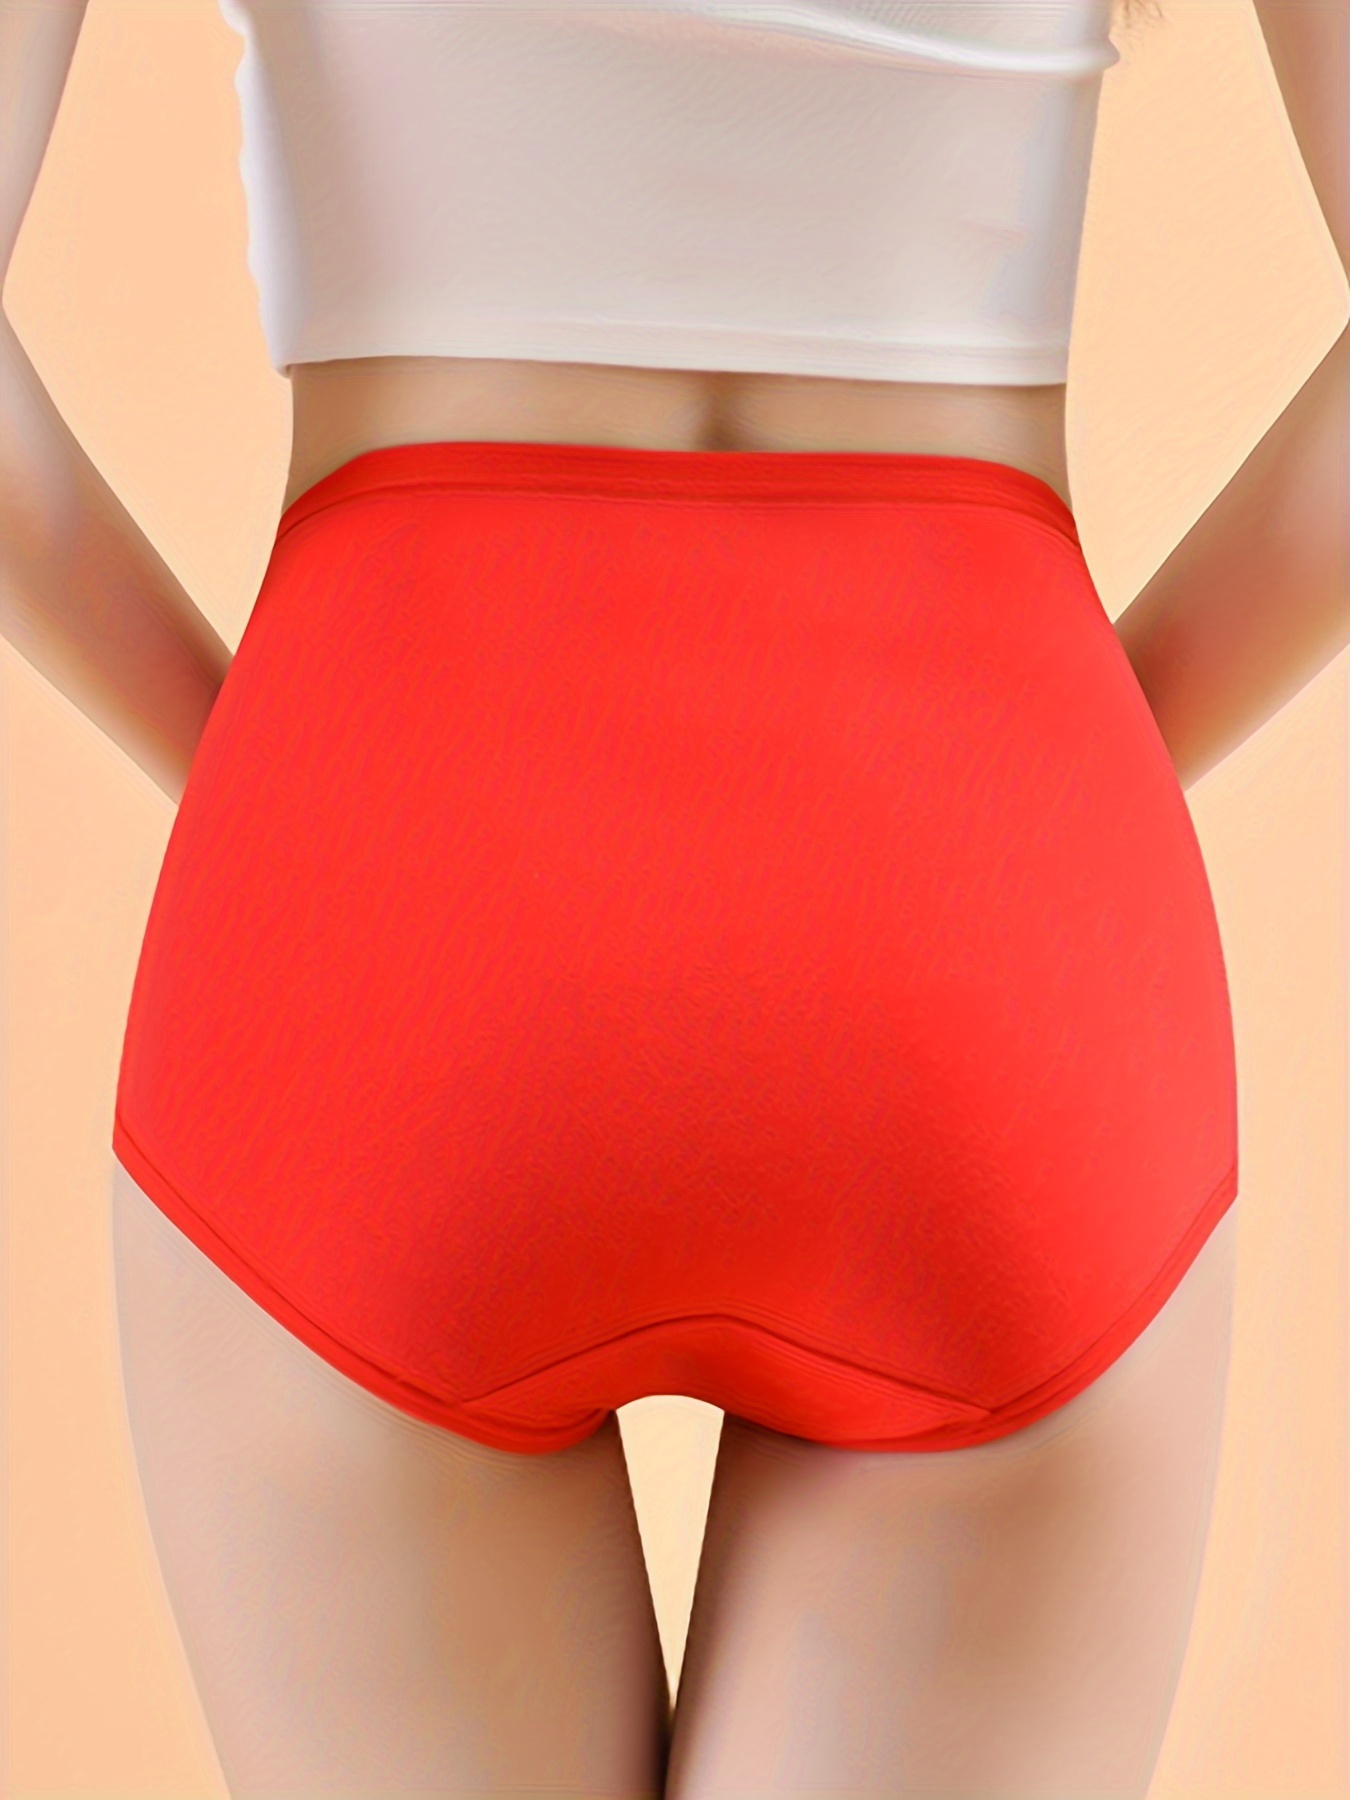 JIXIANG FU FISH High Waist Red Cotton High Waisted Briefs Set Of 3 Lady  Underpants With Chinese Letters For Soft And Comfortable Women From  Mobeisiran, $18.89